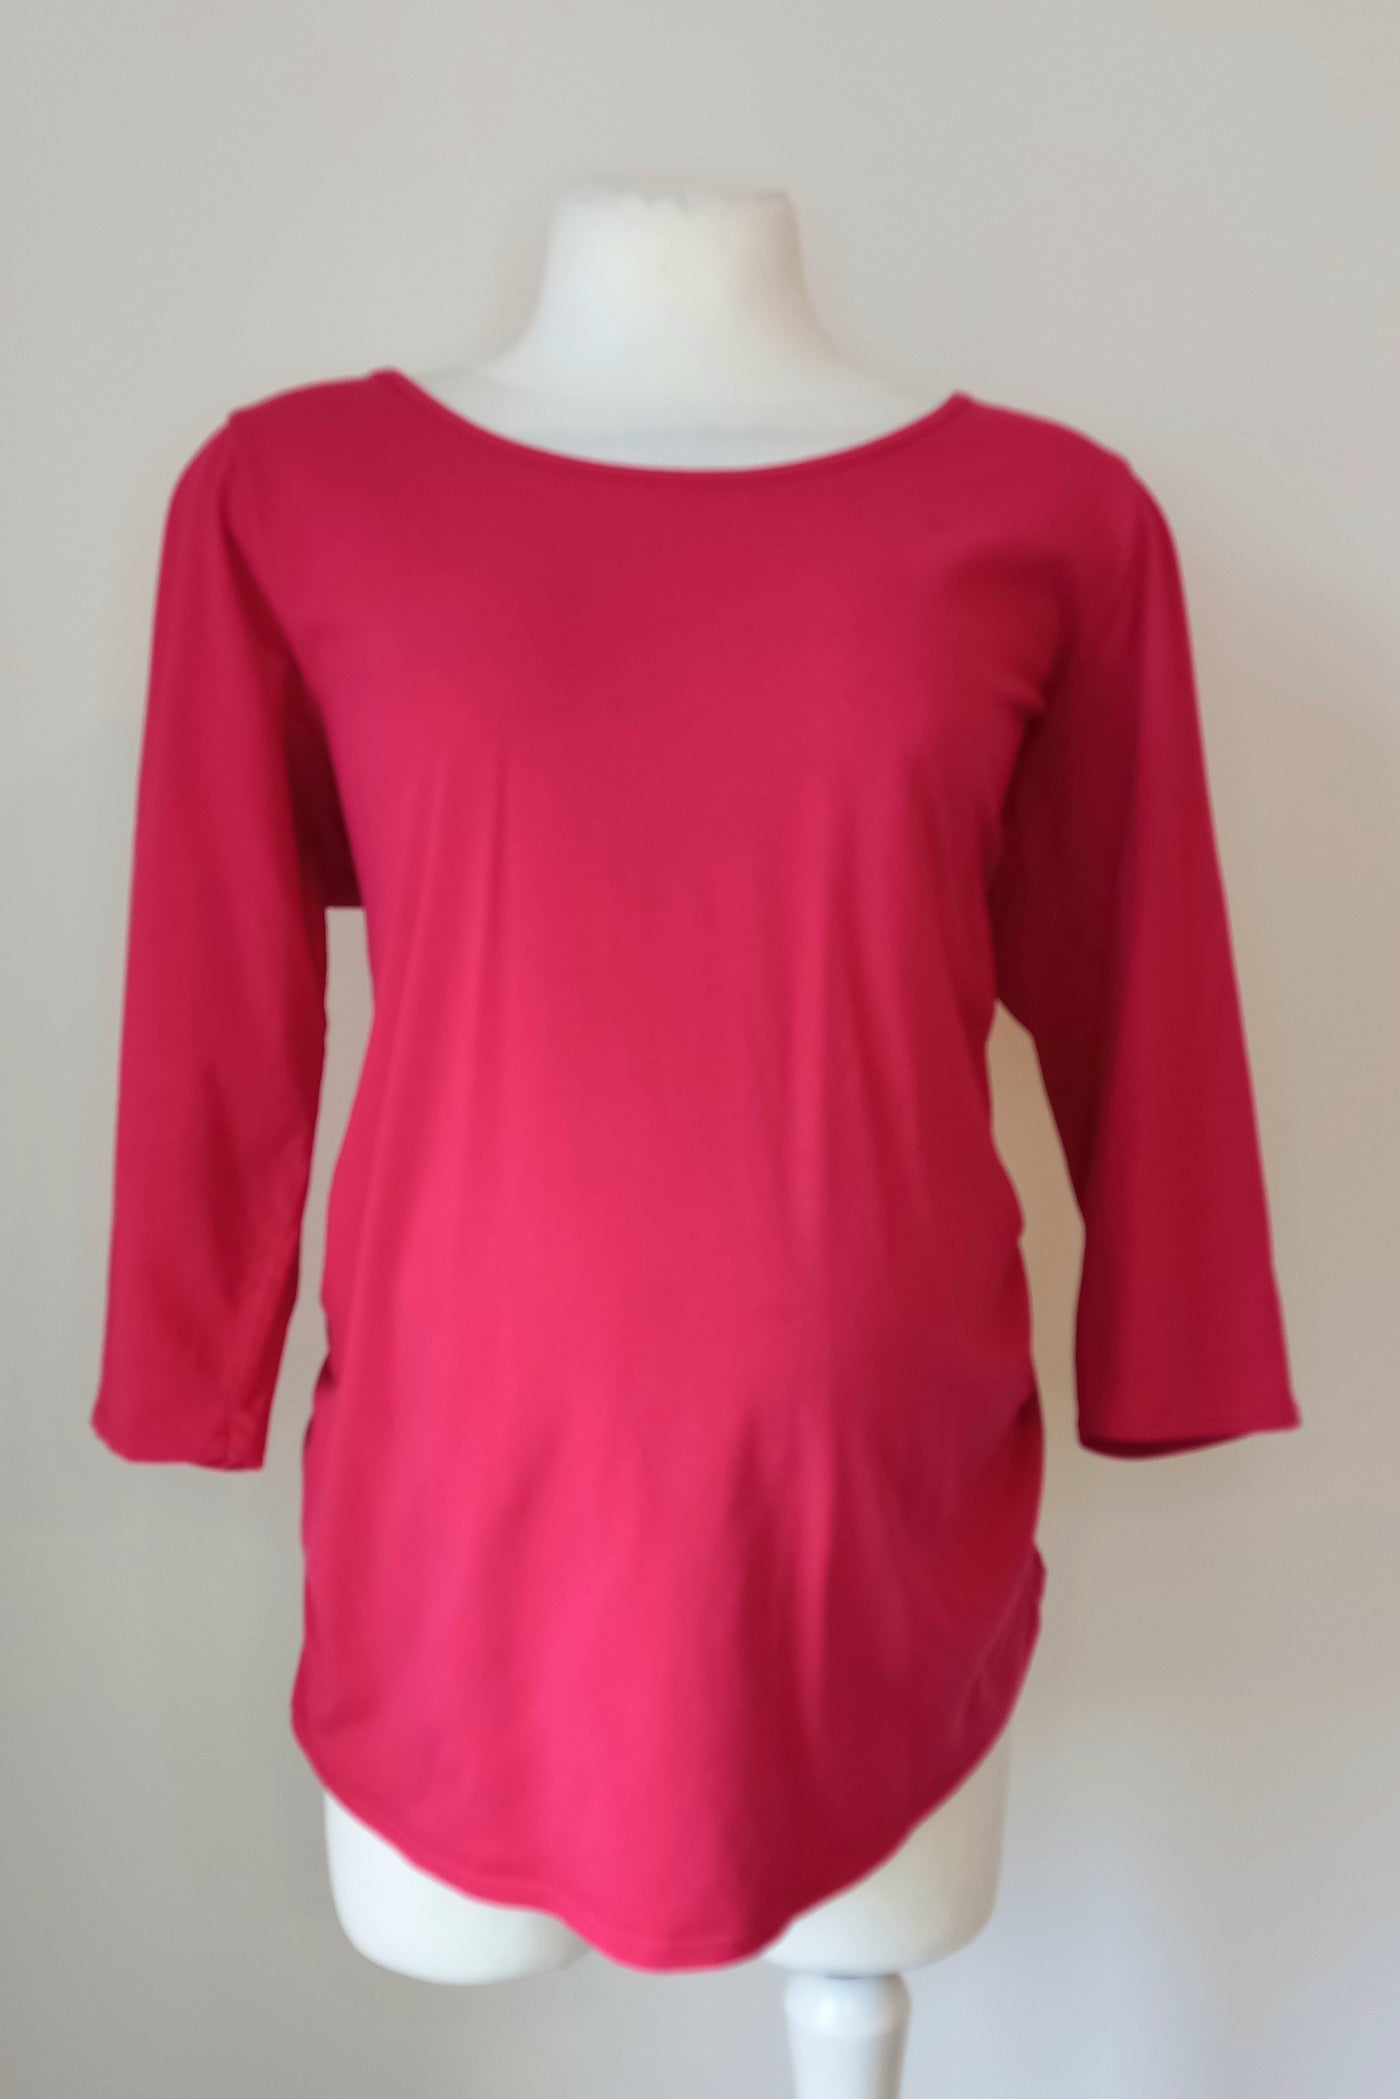 George Maternity Pink 3/4 Sleeved Top - Size 18